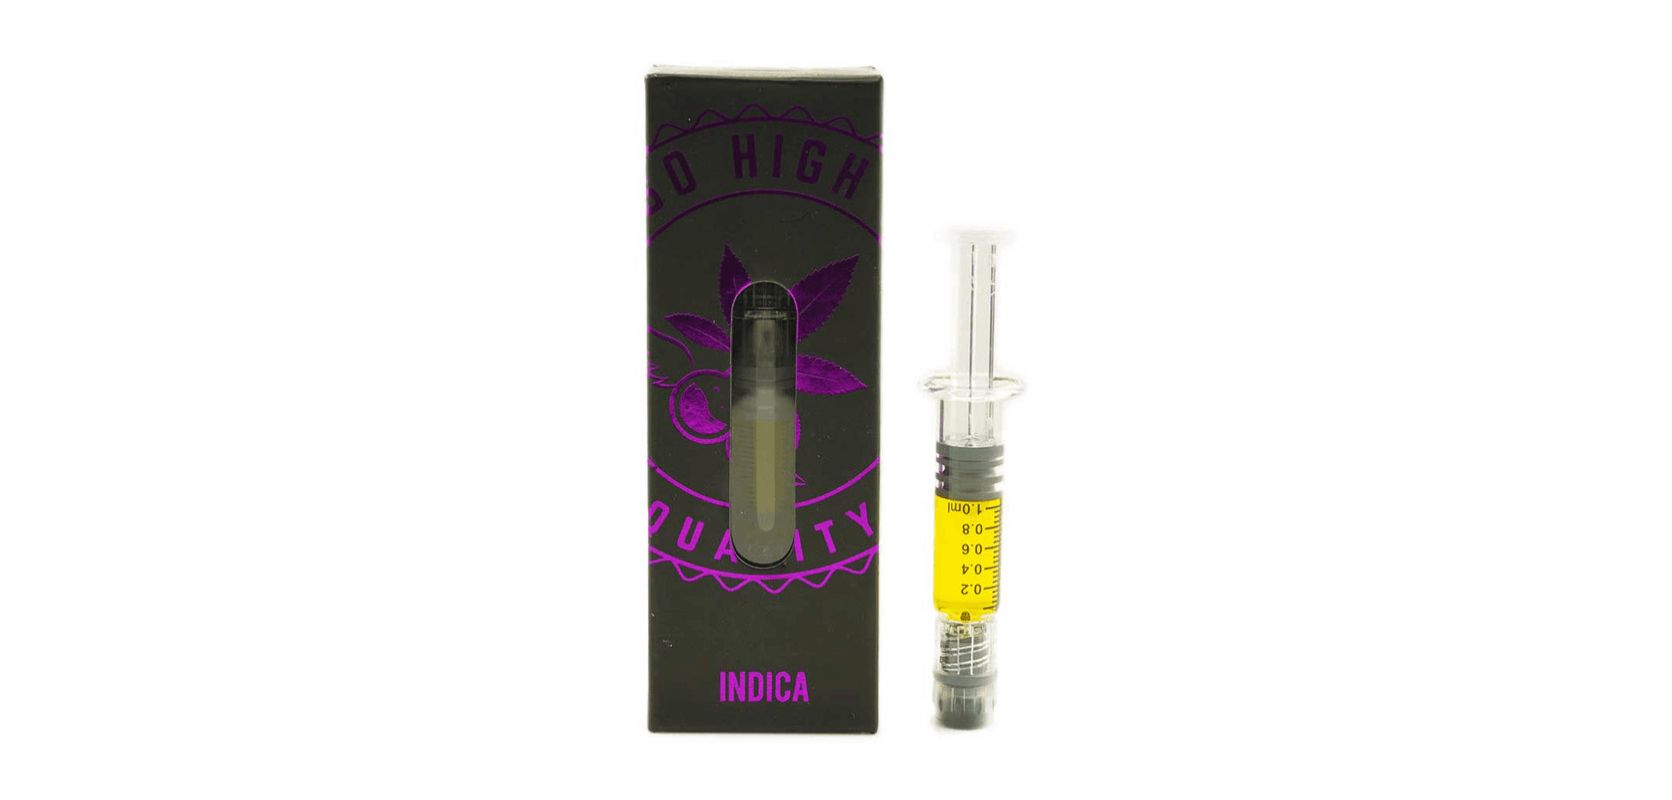 If you want to taste the most refreshing and powerful THC syringe on the market, we recommend the So High Premium Syringes – Watermelon (Indica). 